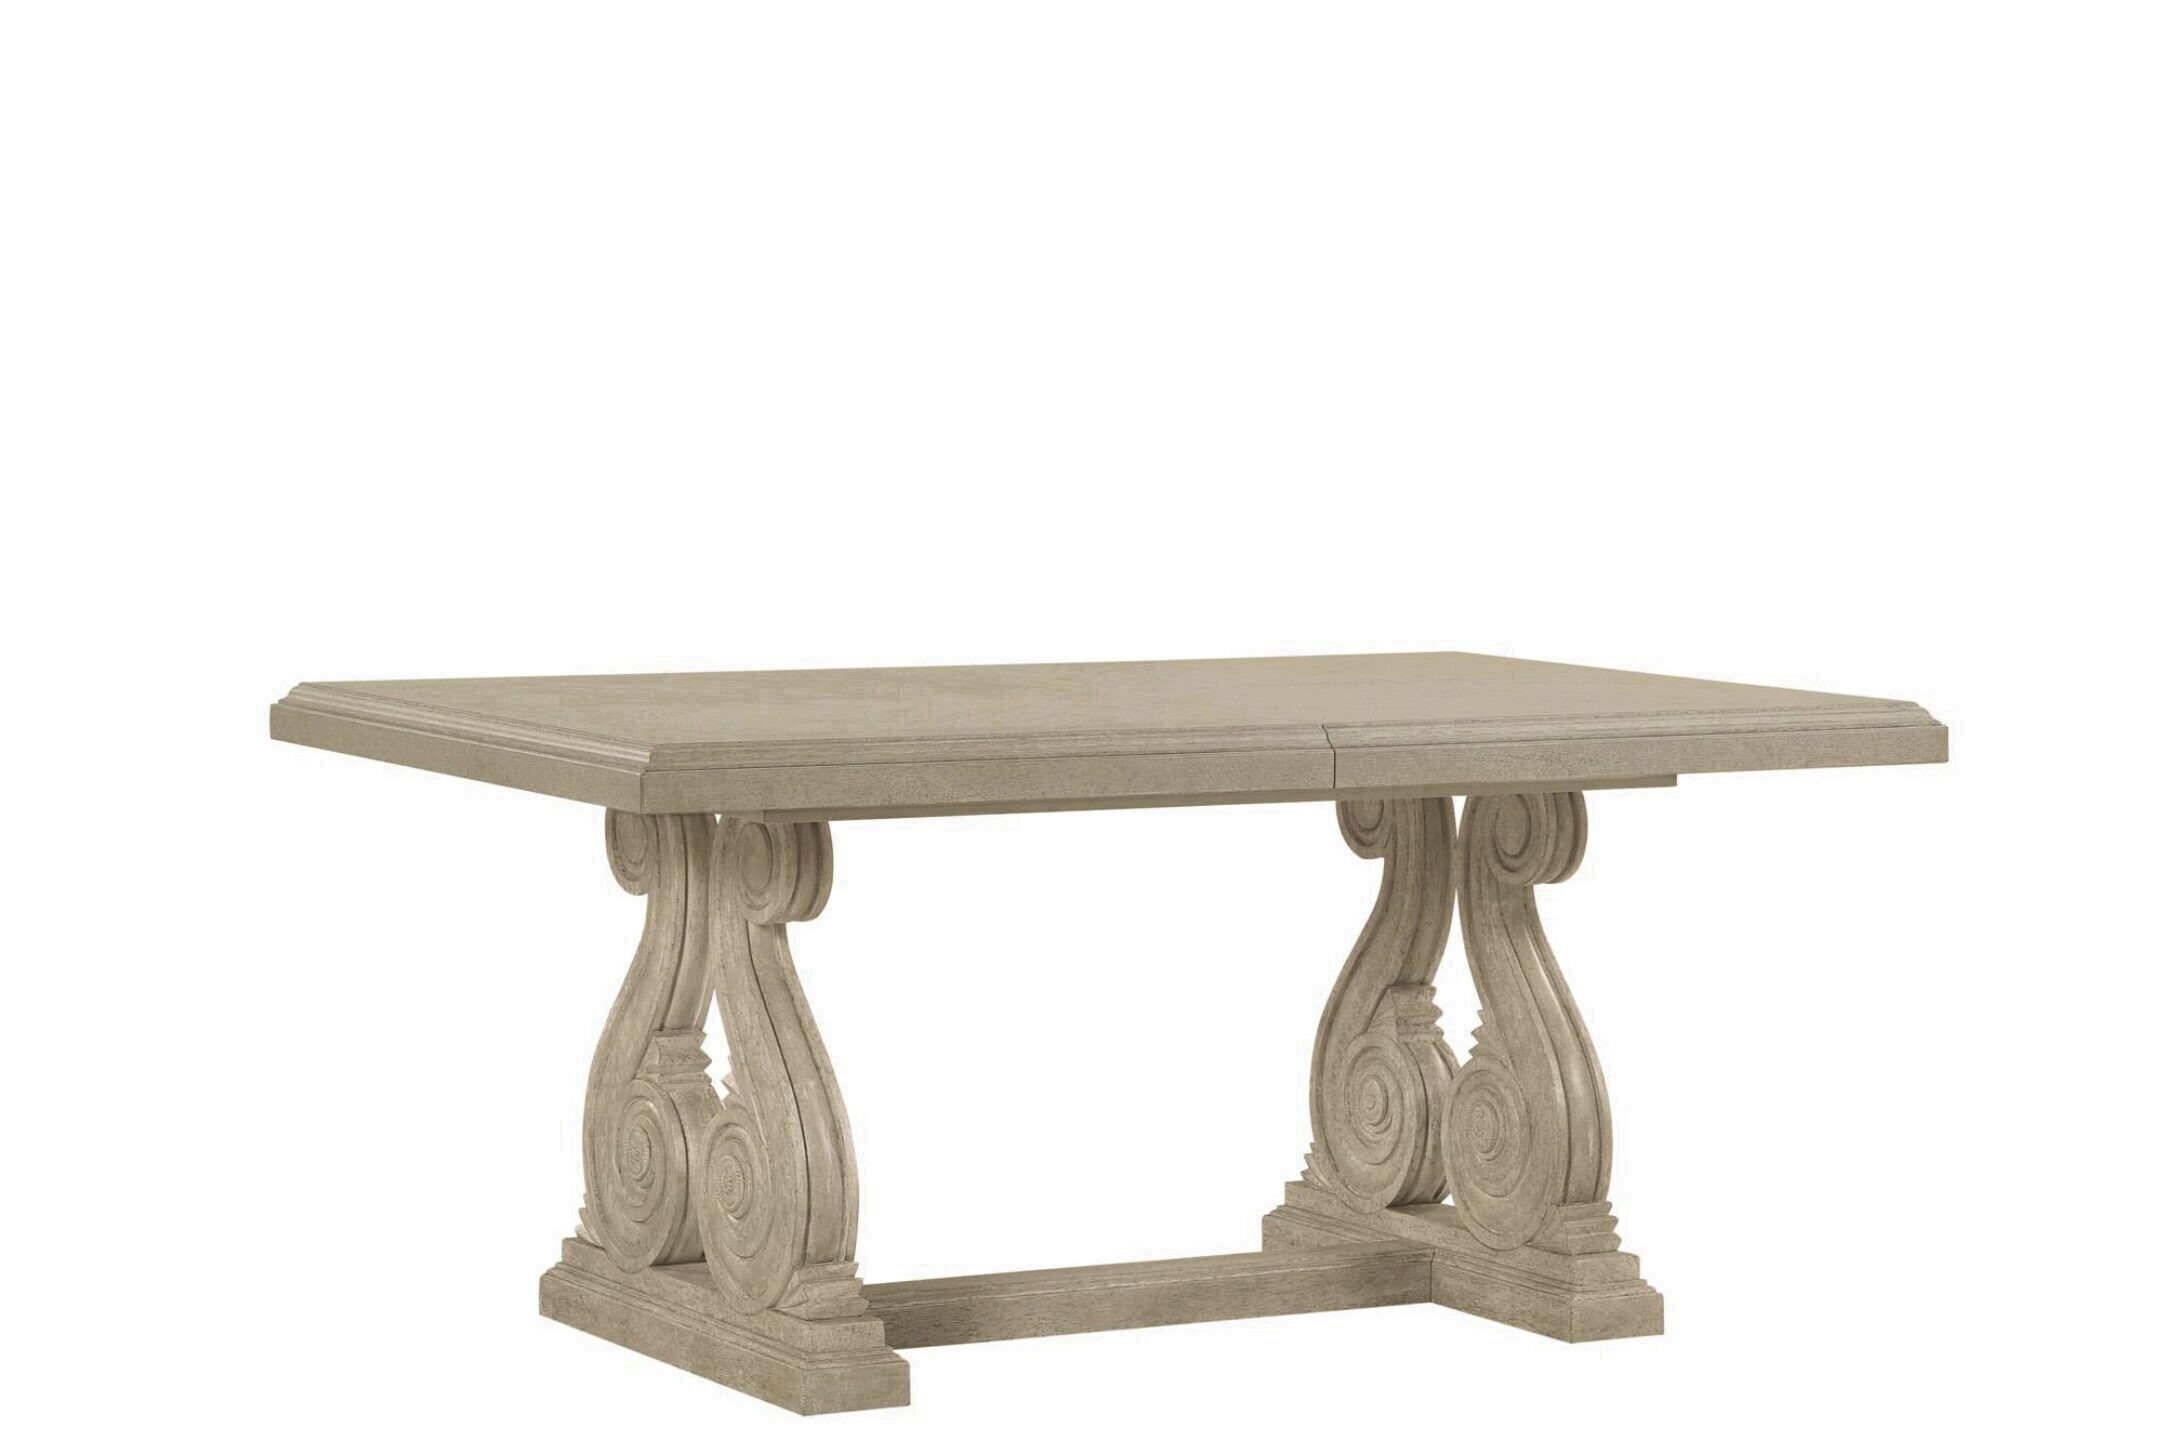 ARCH SALVAGE - RECTANGULAR DINING TABLE - PARCH